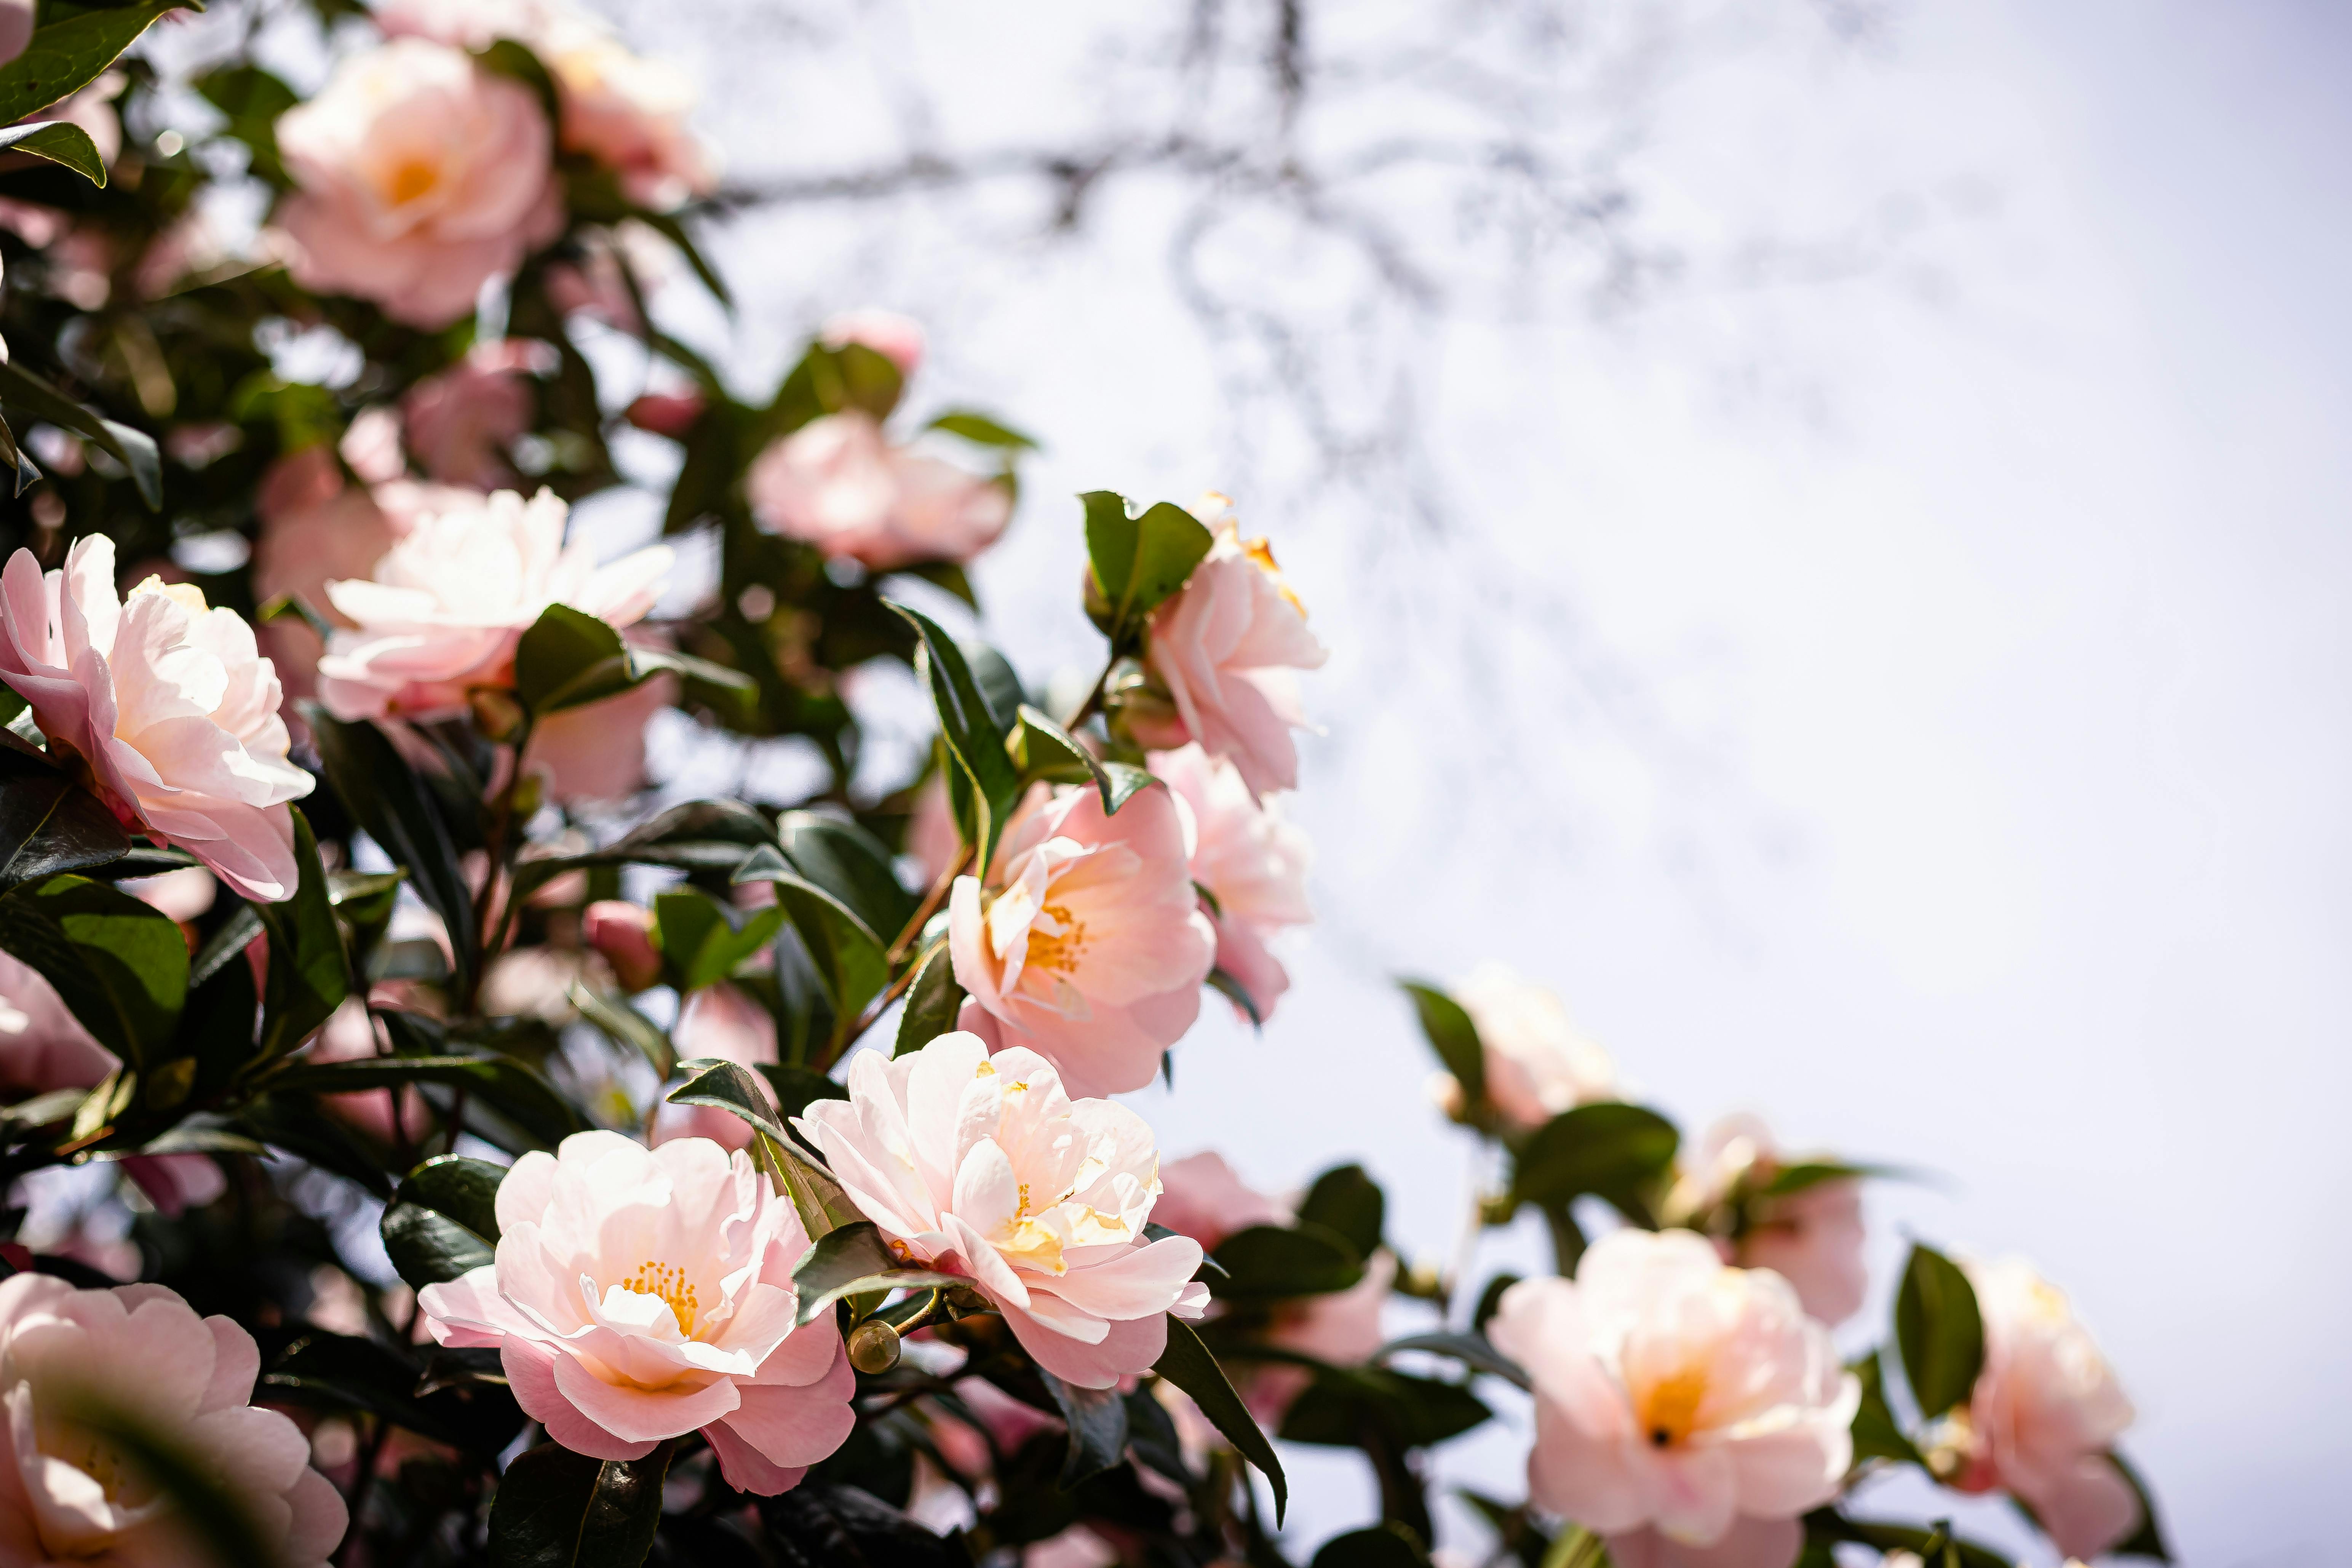 Pink Camelia Flowers in Close Up Photography · Free Stock Photo